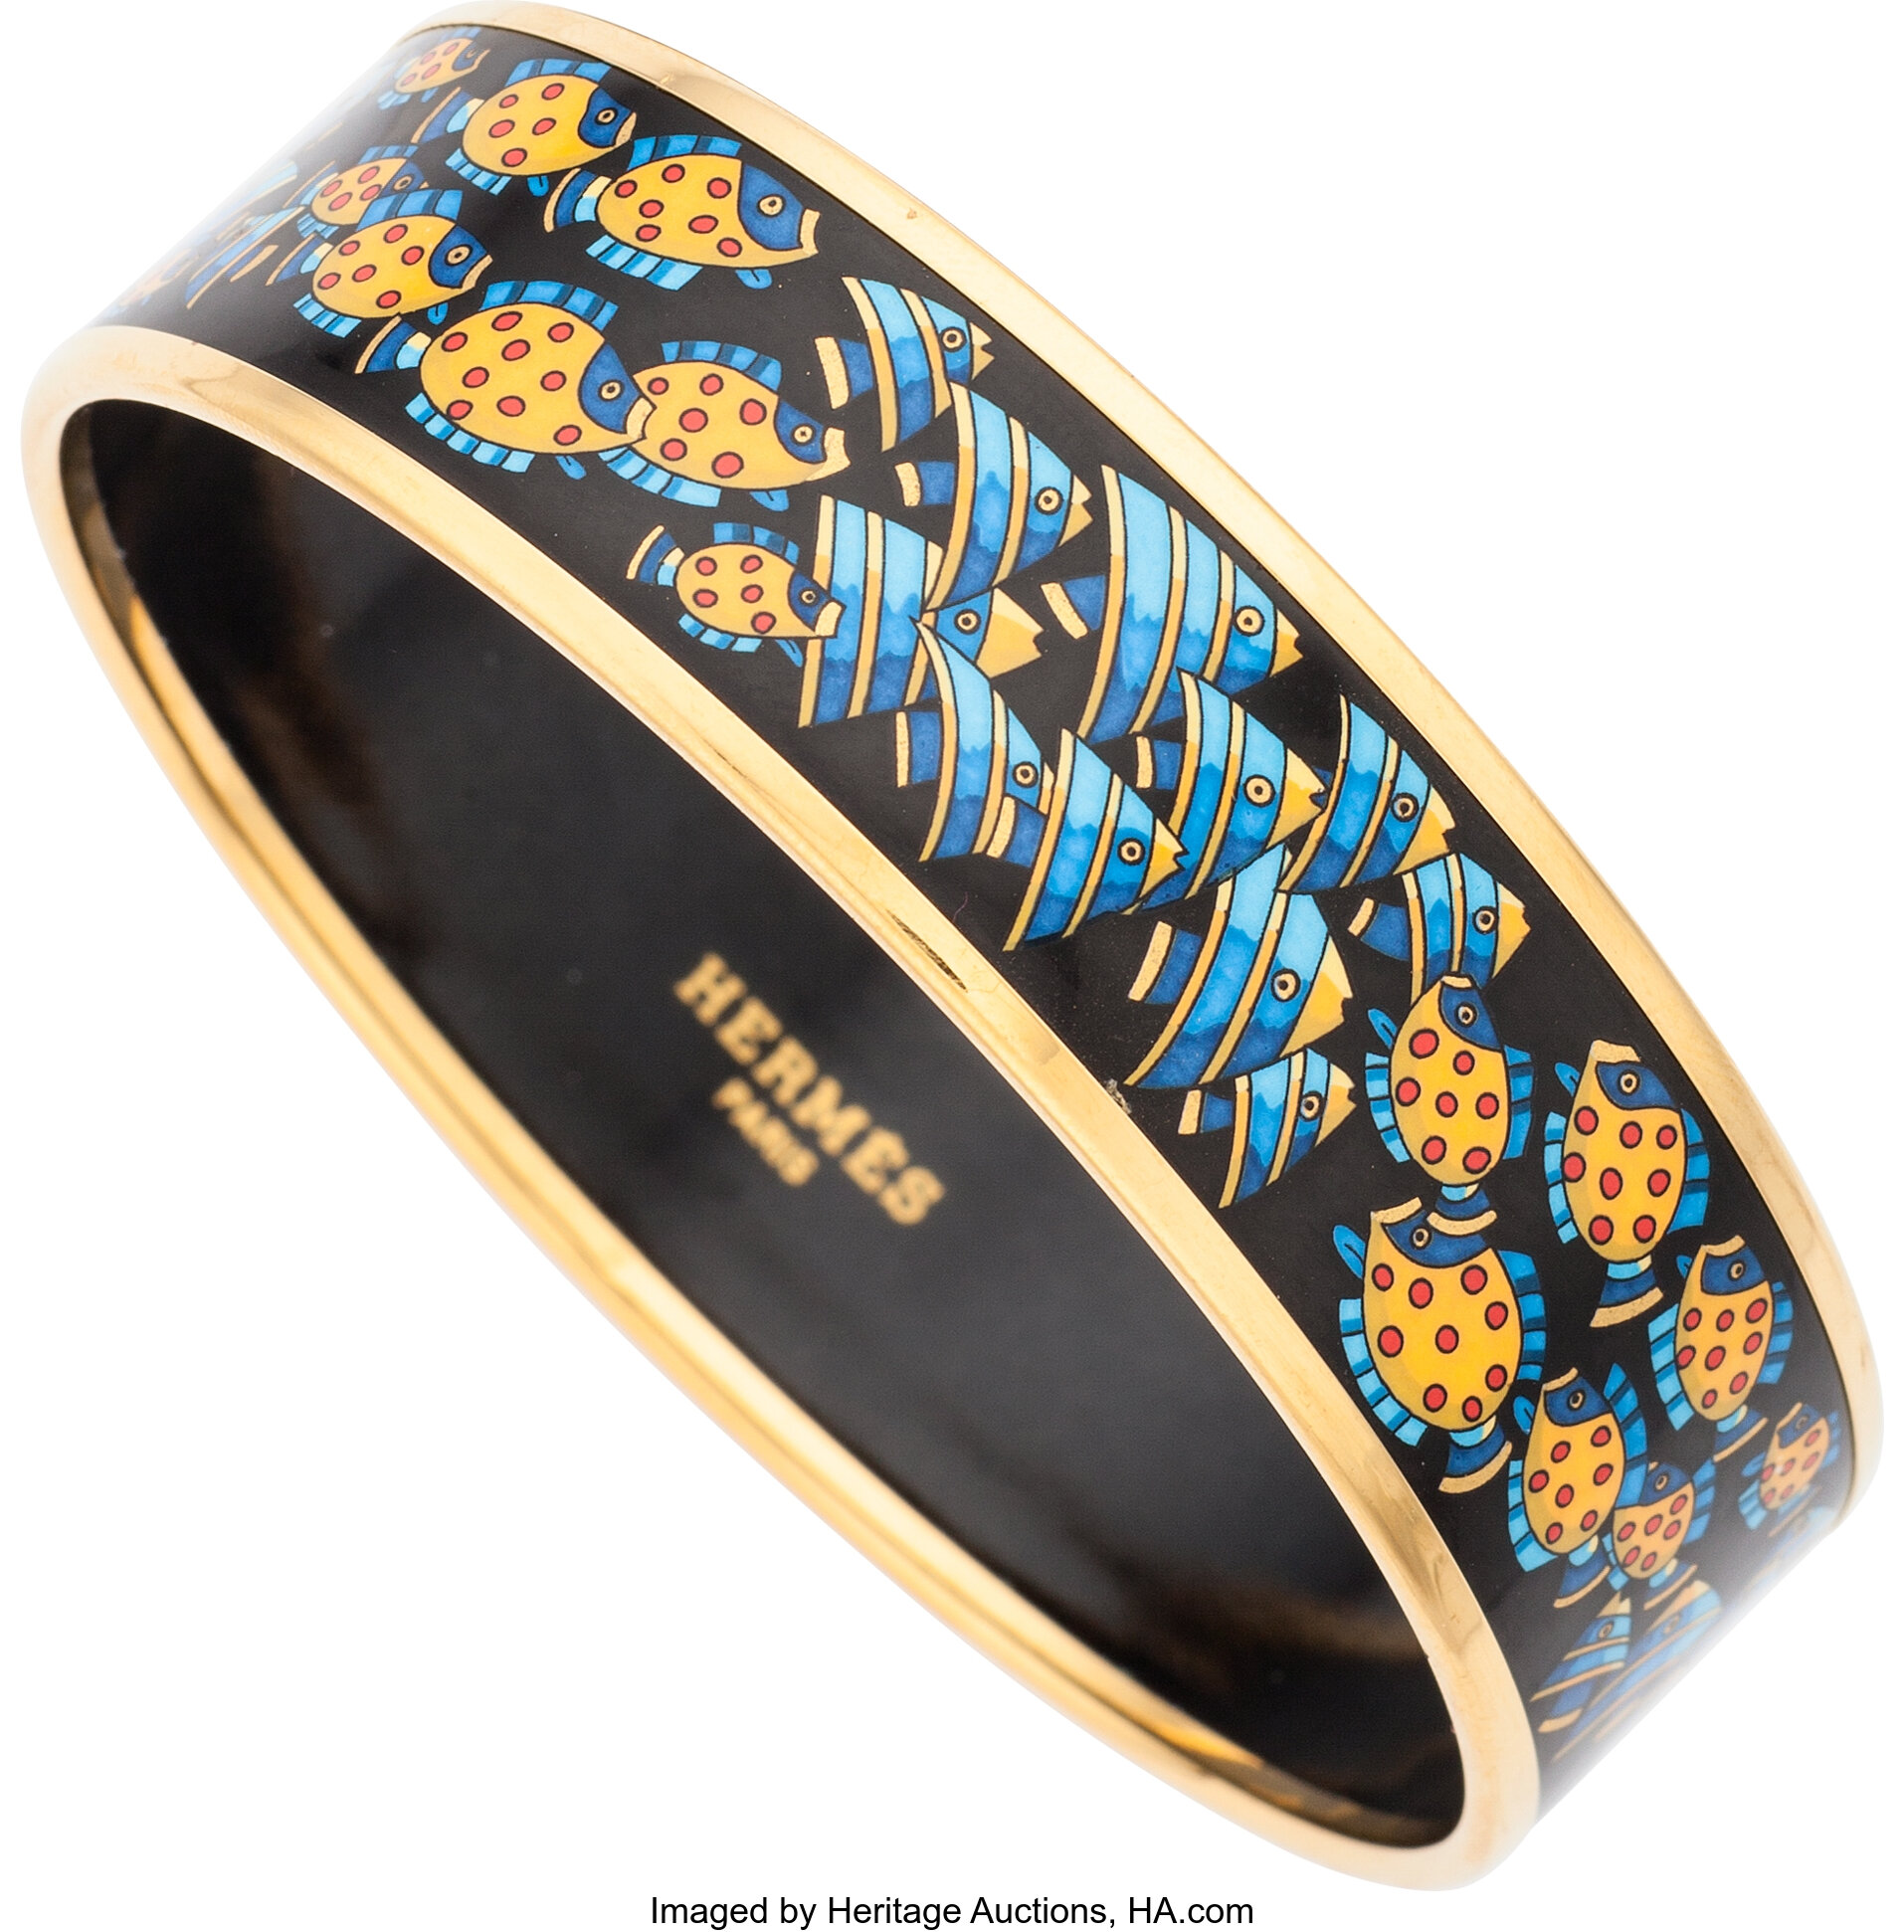 Sold at Auction: Hermes Paris Light Blue Bangle In The Manner Of